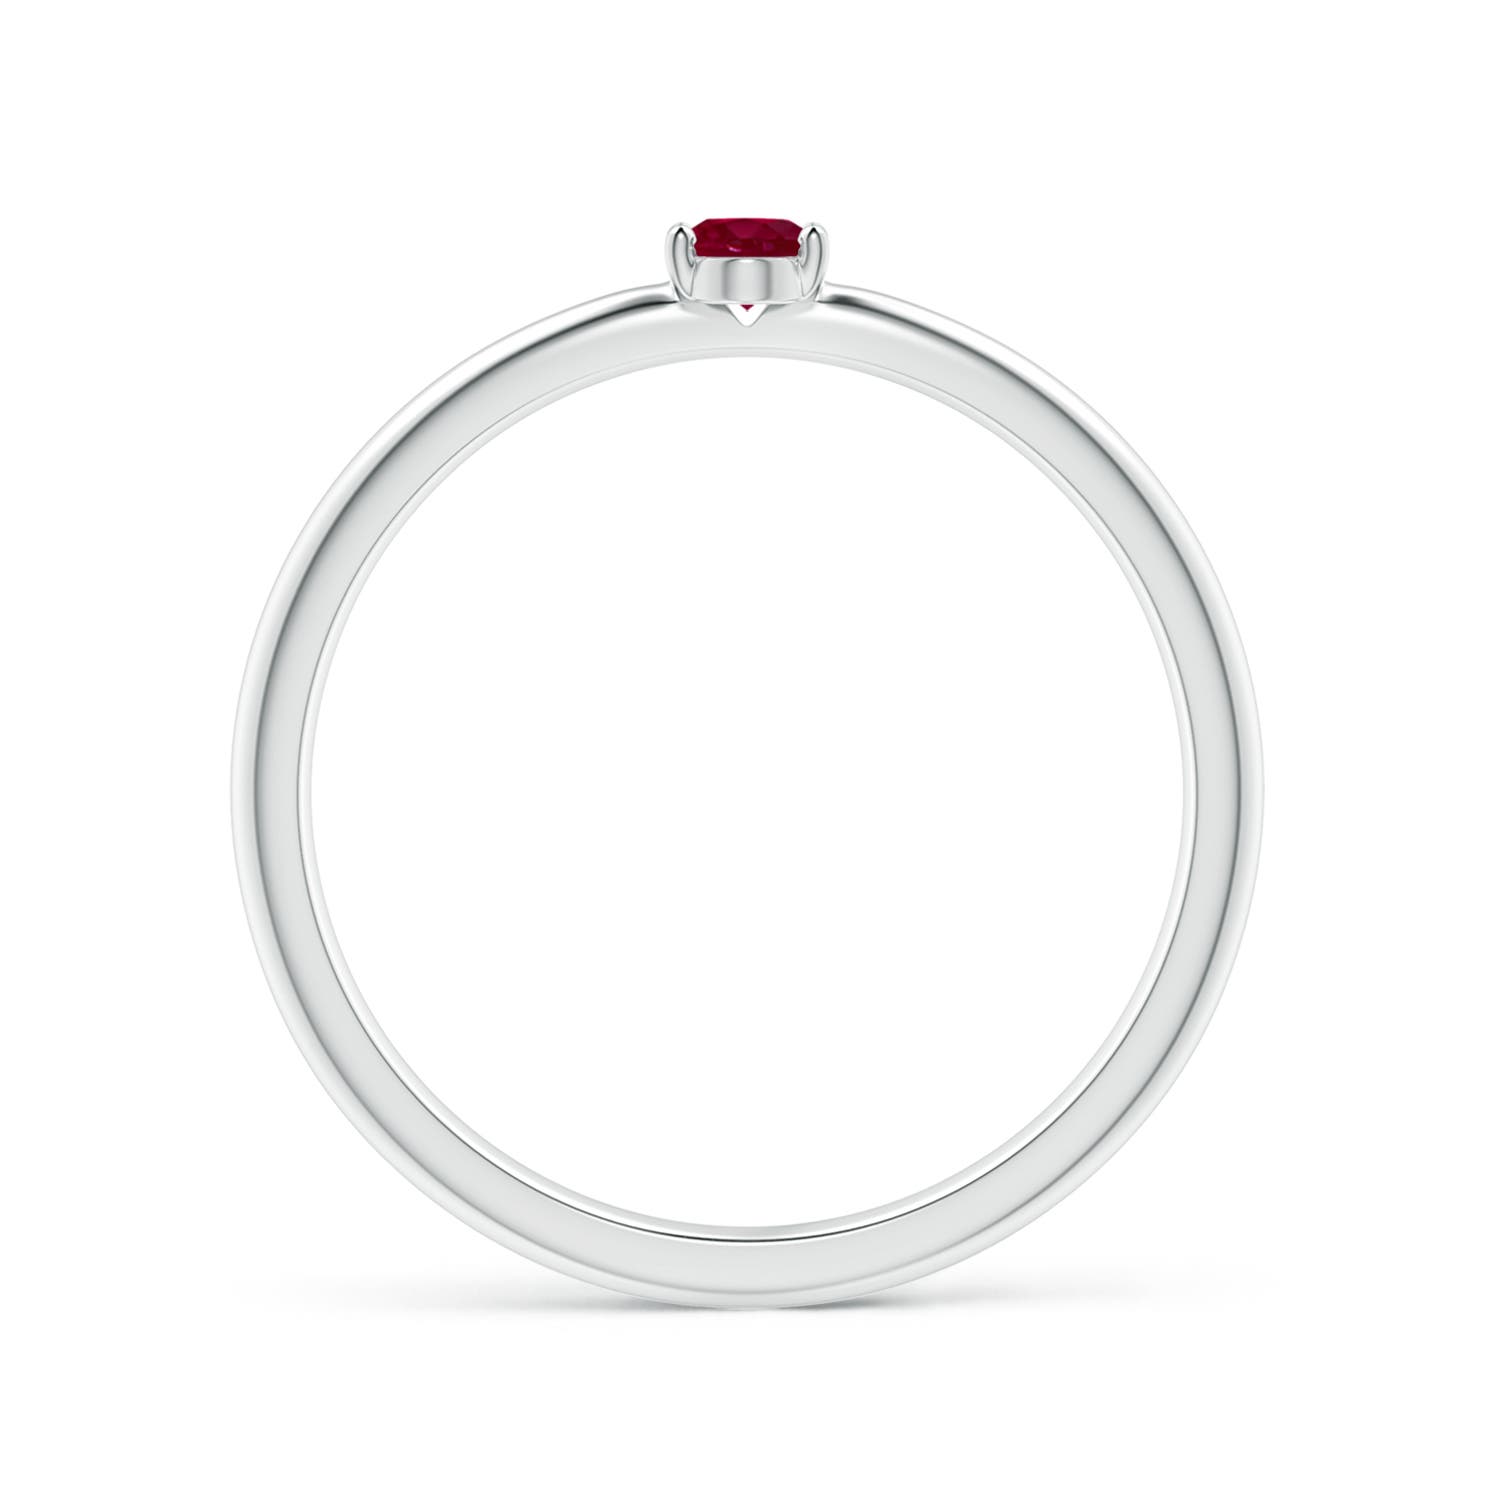 A - Ruby / 0.2 CT / 14 KT White Gold